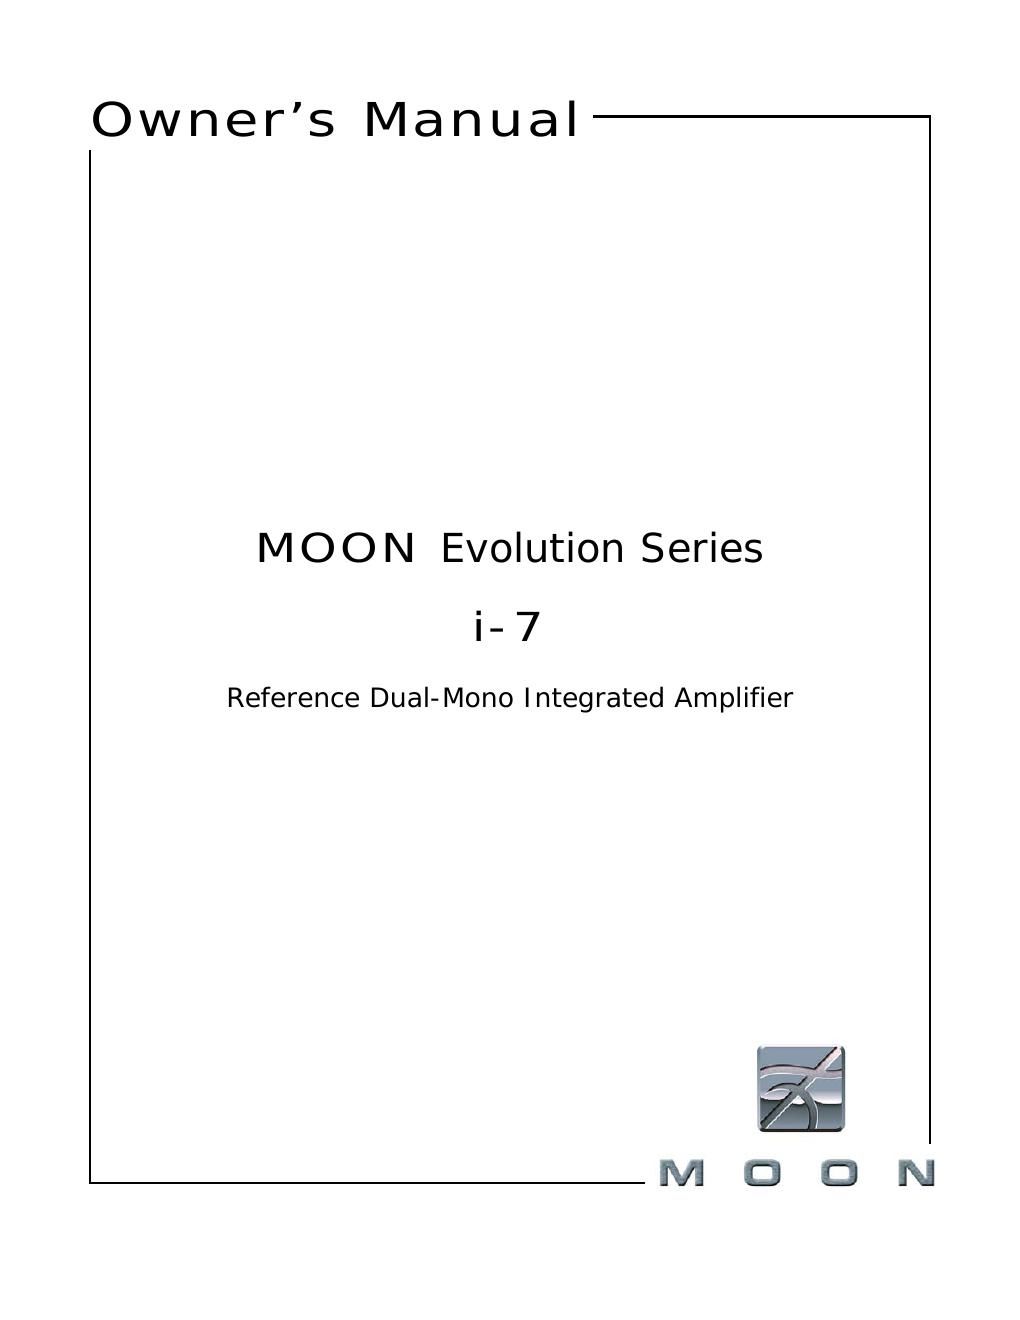 moon i 7 owners manual